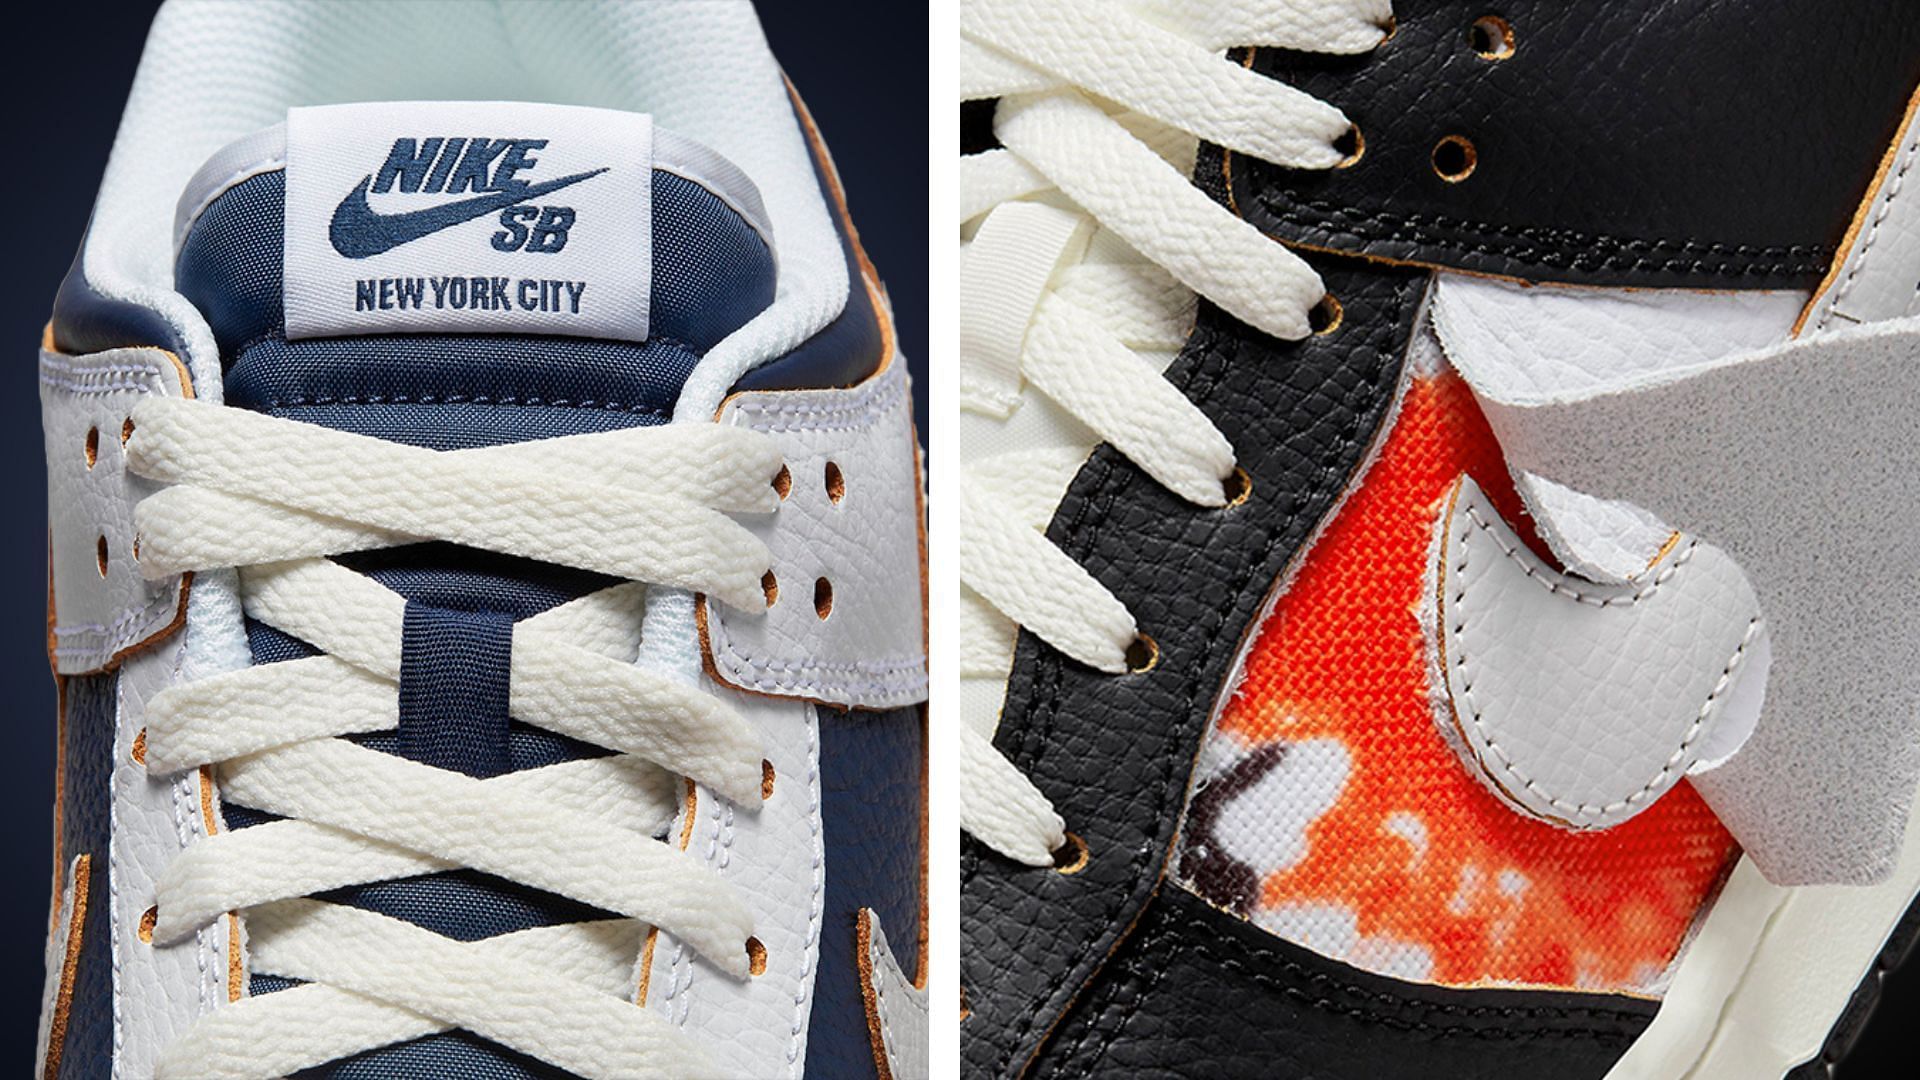 Here&#039;s a detailed look at the tongue areas and tie-dye prints of the sneakers (Image via Nike)